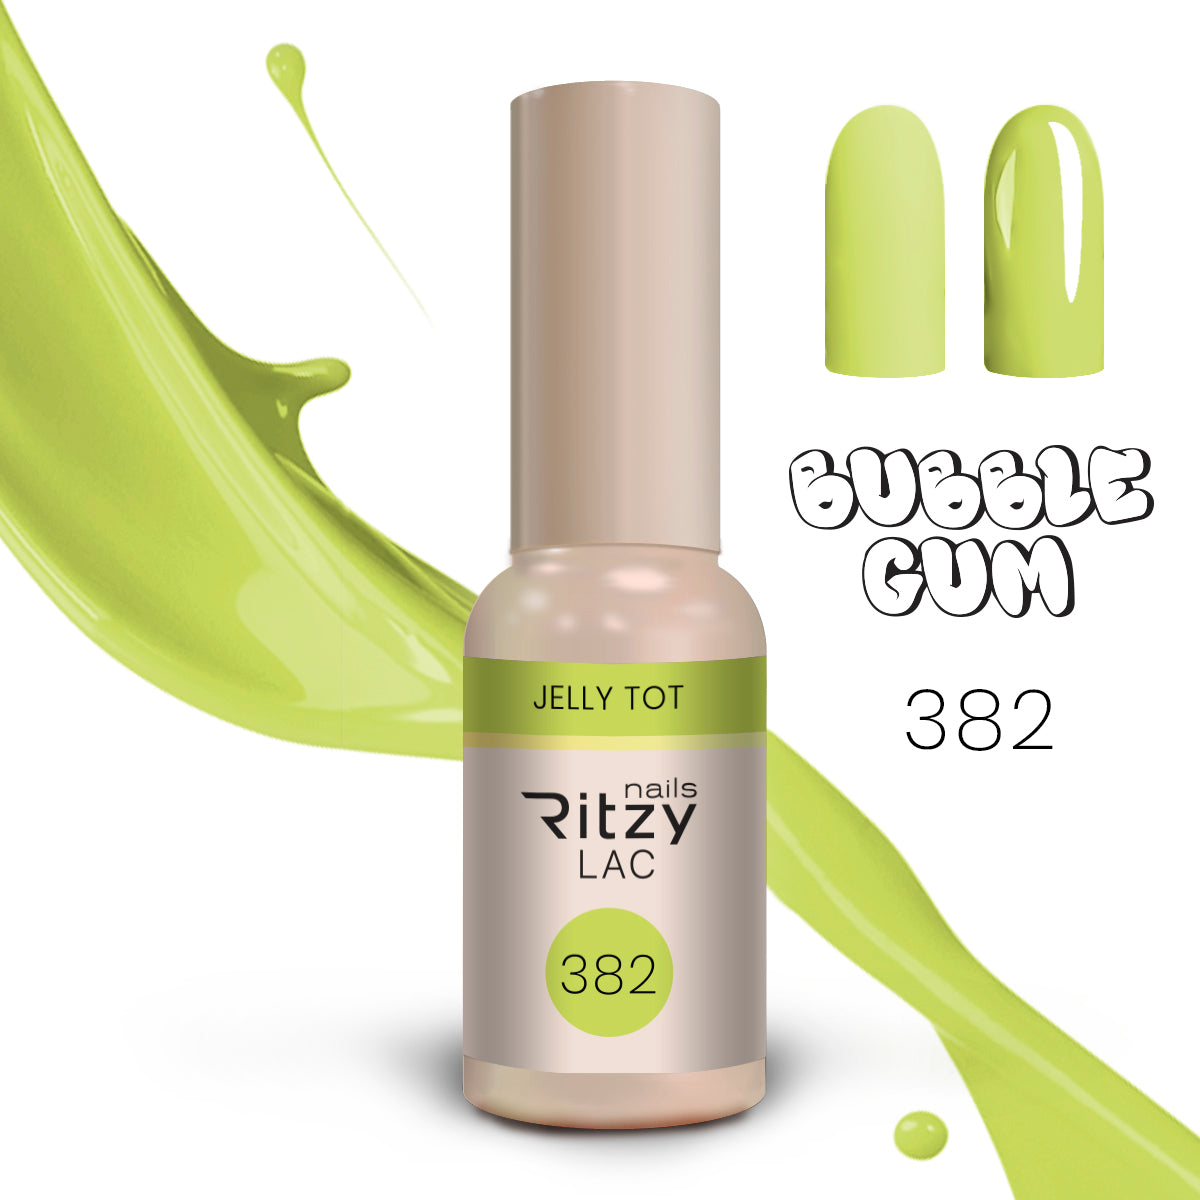 Ritzy lac Jelly Tot nr 382